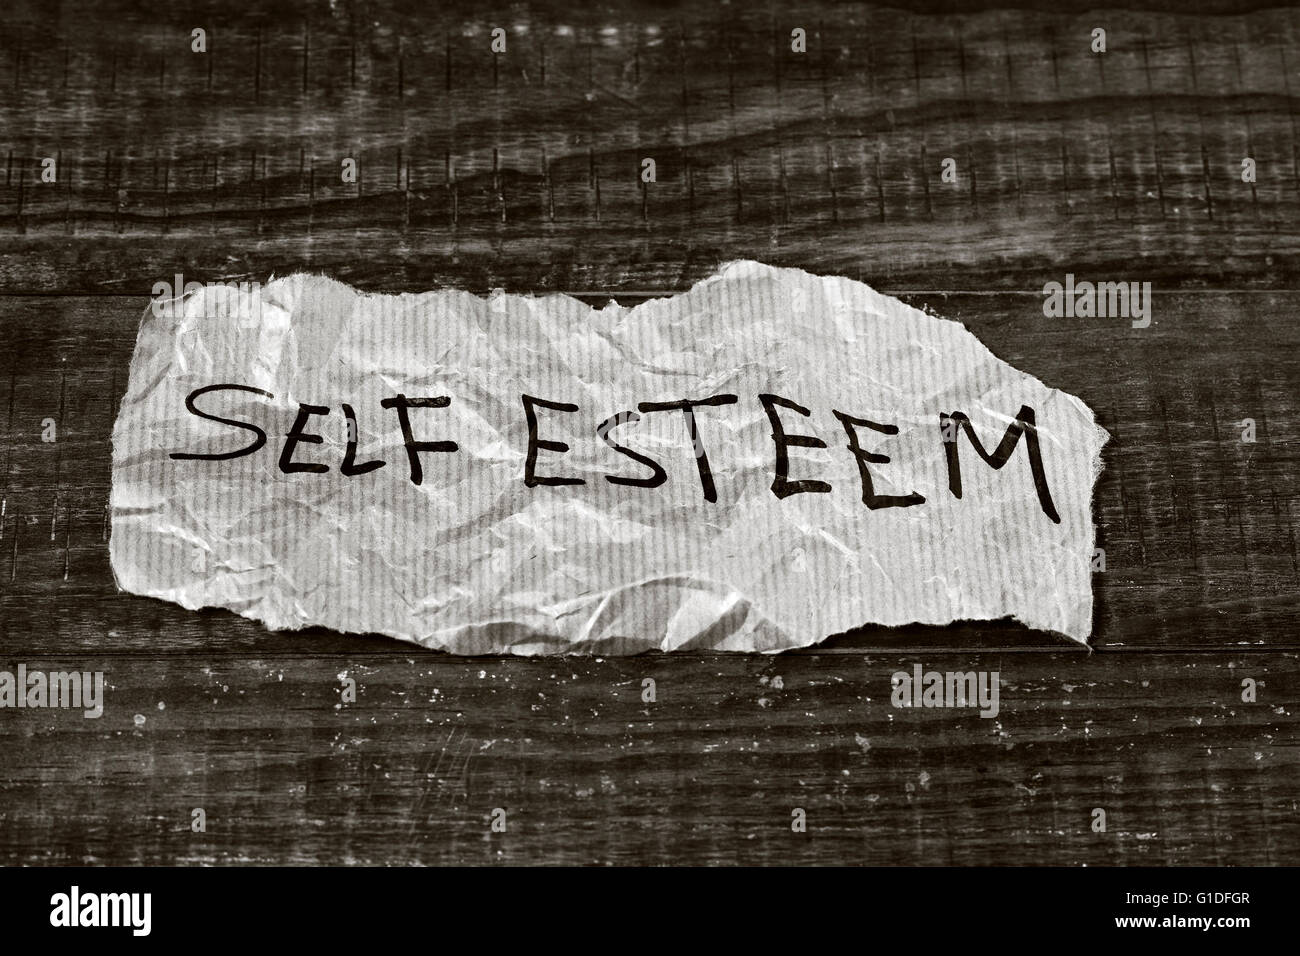 the text self esteem written in a piece of paper, placed on a rustic wooden surface, in black and white Stock Photo